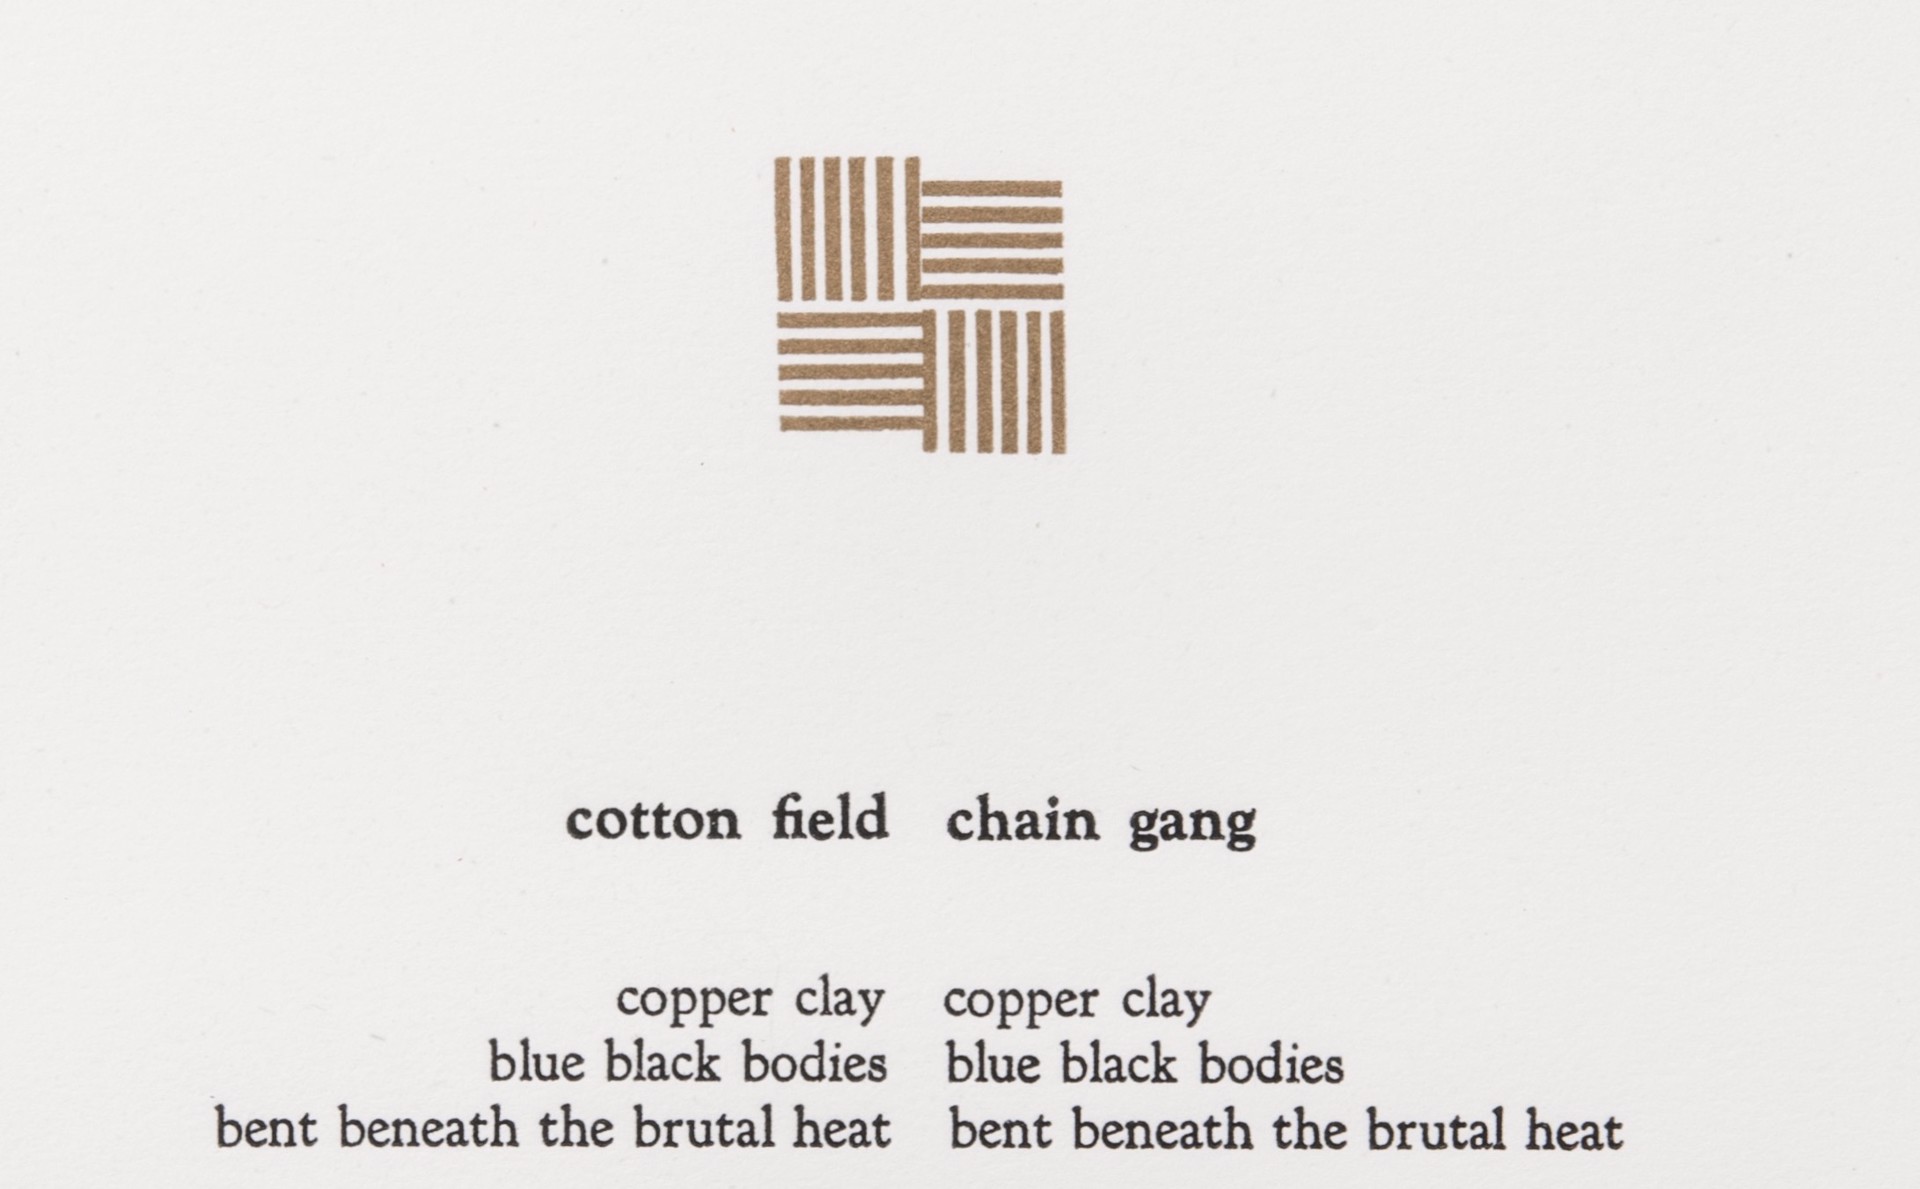 Cotton field/Chain Gang by Marianetta Porter